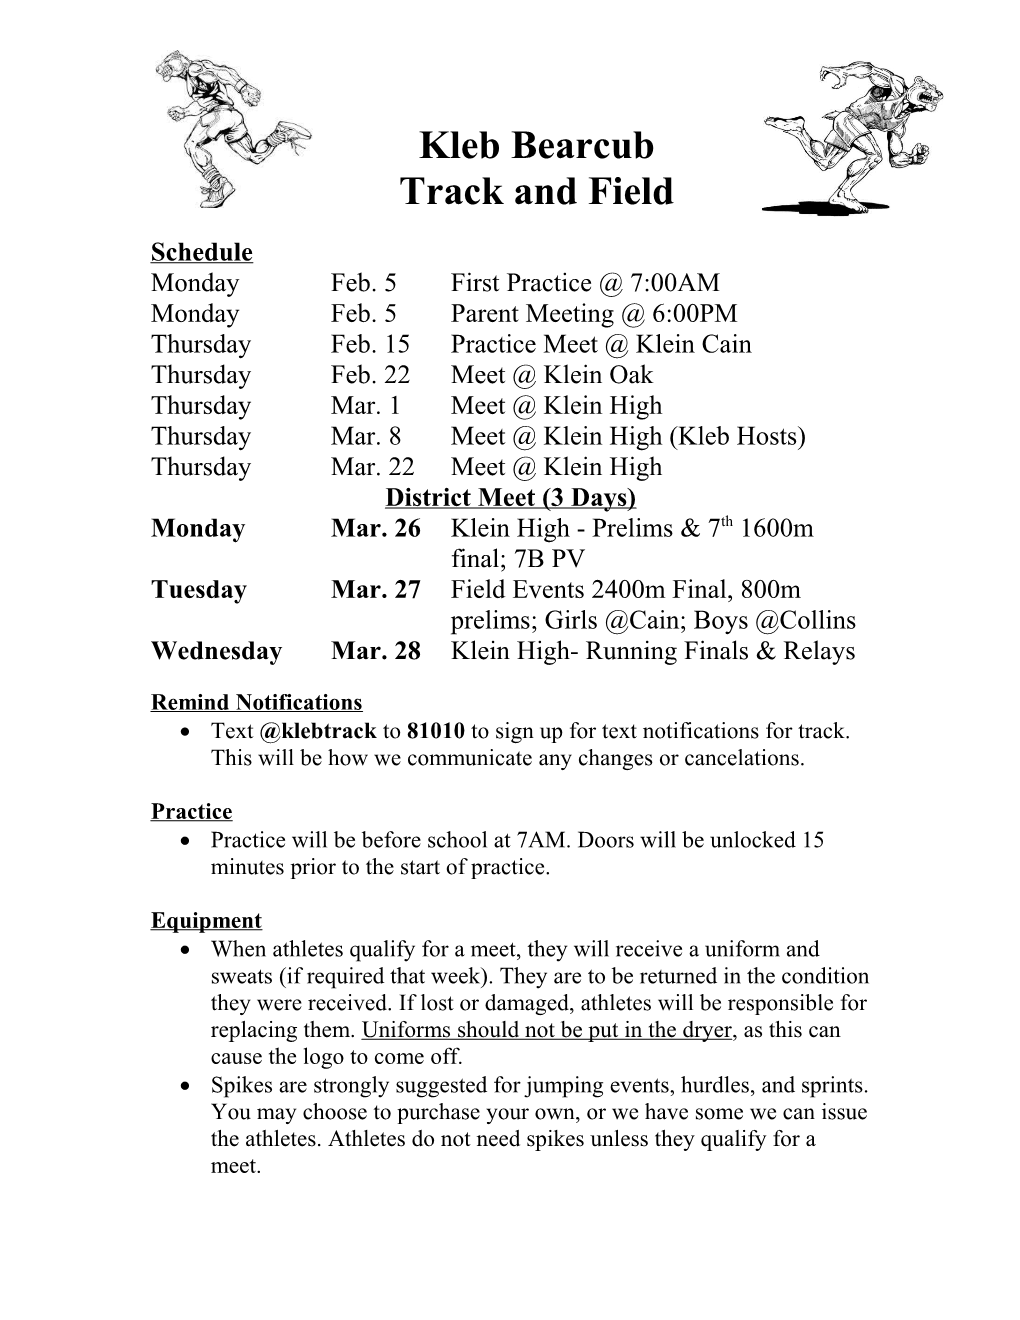 2003 Boys Track and Field